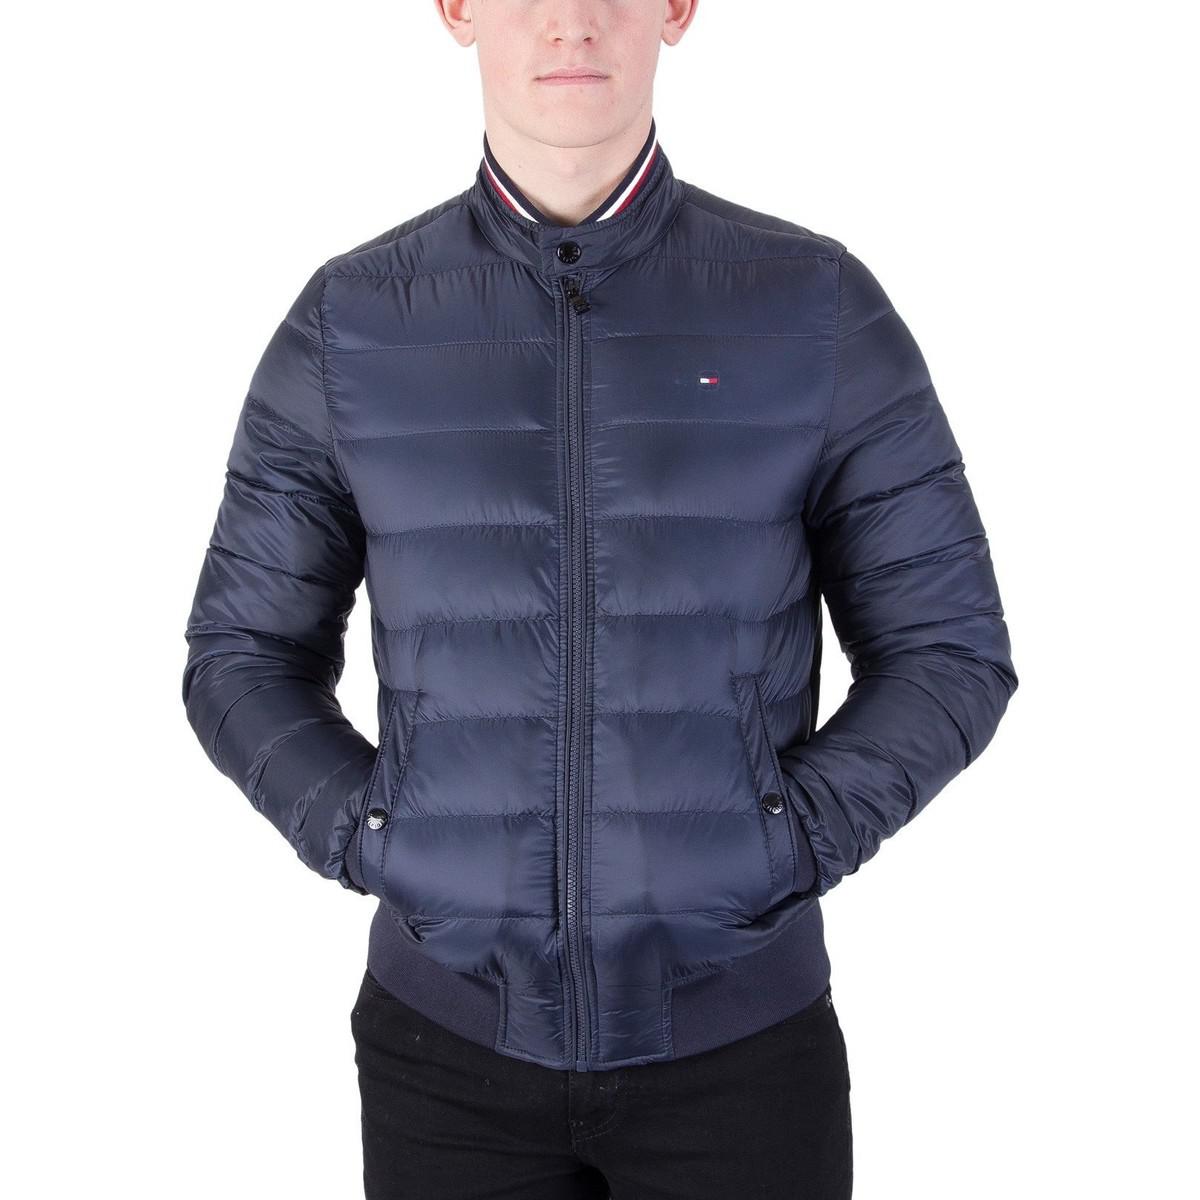 Tommy Hilfiger Arlos Bomber Clearance, 58% OFF | www.logistica360.pe